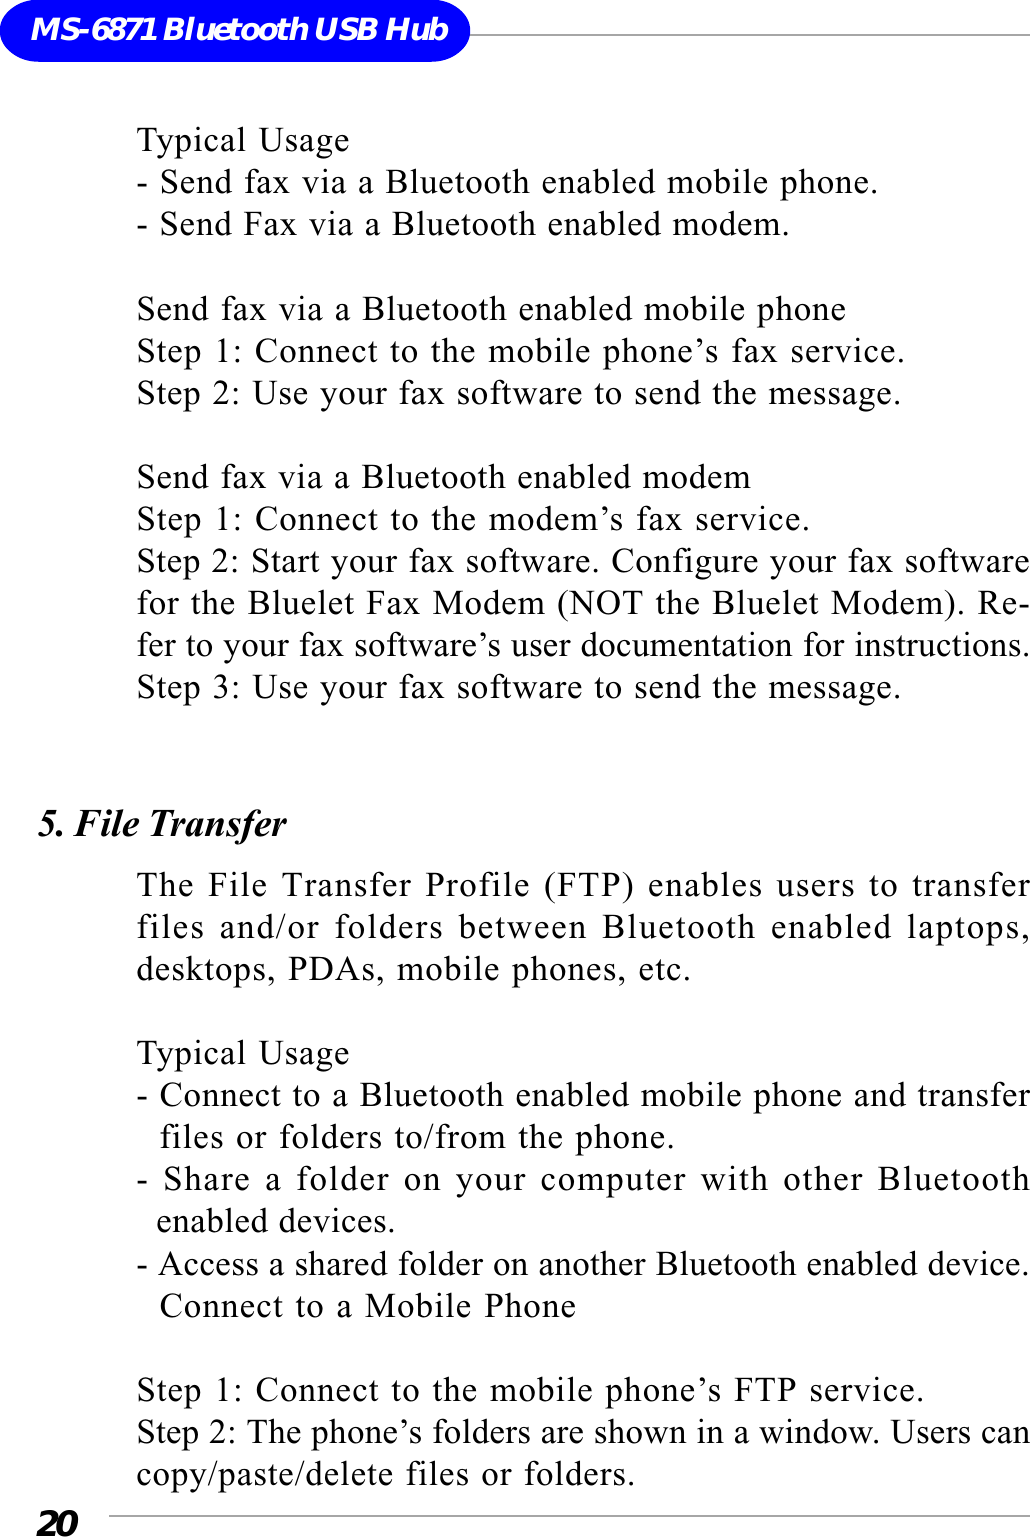 20MS-6871 Bluetooth USB HubTypical Usage- Send fax via a Bluetooth enabled mobile phone.- Send Fax via a Bluetooth enabled modem.Send fax via a Bluetooth enabled mobile phoneStep 1: Connect to the mobile phone’s fax service.Step 2: Use your fax software to send the message.Send fax via a Bluetooth enabled modemStep 1: Connect to the modem’s fax service.Step 2: Start your fax software. Configure your fax softwarefor the Bluelet Fax Modem (NOT the Bluelet Modem). Re-fer to your fax software’s user documentation for instructions.Step 3: Use your fax software to send the message.5. File TransferThe File Transfer Profile (FTP) enables users to transferfiles and/or folders between Bluetooth enabled laptops,desktops, PDAs, mobile phones, etc.Typical Usage- Connect to a Bluetooth enabled mobile phone and transfer  files or folders to/from the phone.- Share a folder on your computer with other Bluetooth  enabled devices.- Access a shared folder on another Bluetooth enabled device.  Connect to a Mobile PhoneStep 1: Connect to the mobile phone’s FTP service.Step 2: The phone’s folders are shown in a window. Users cancopy/paste/delete files or folders.